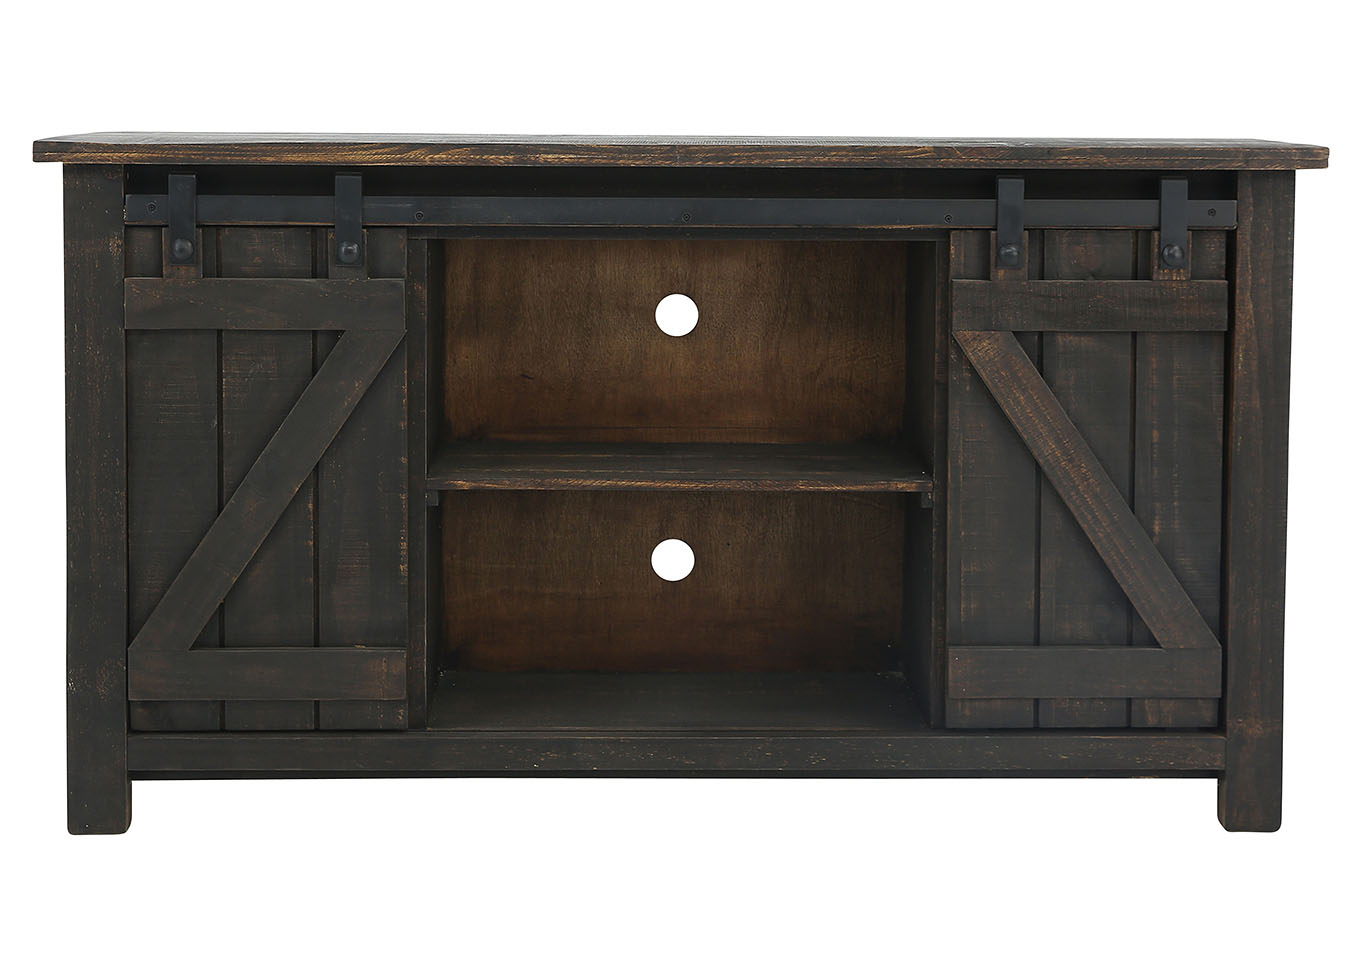 STERLING ROUGH ANTIQUE BARN DOOR TV STAND,RUSTIC IMPORTS